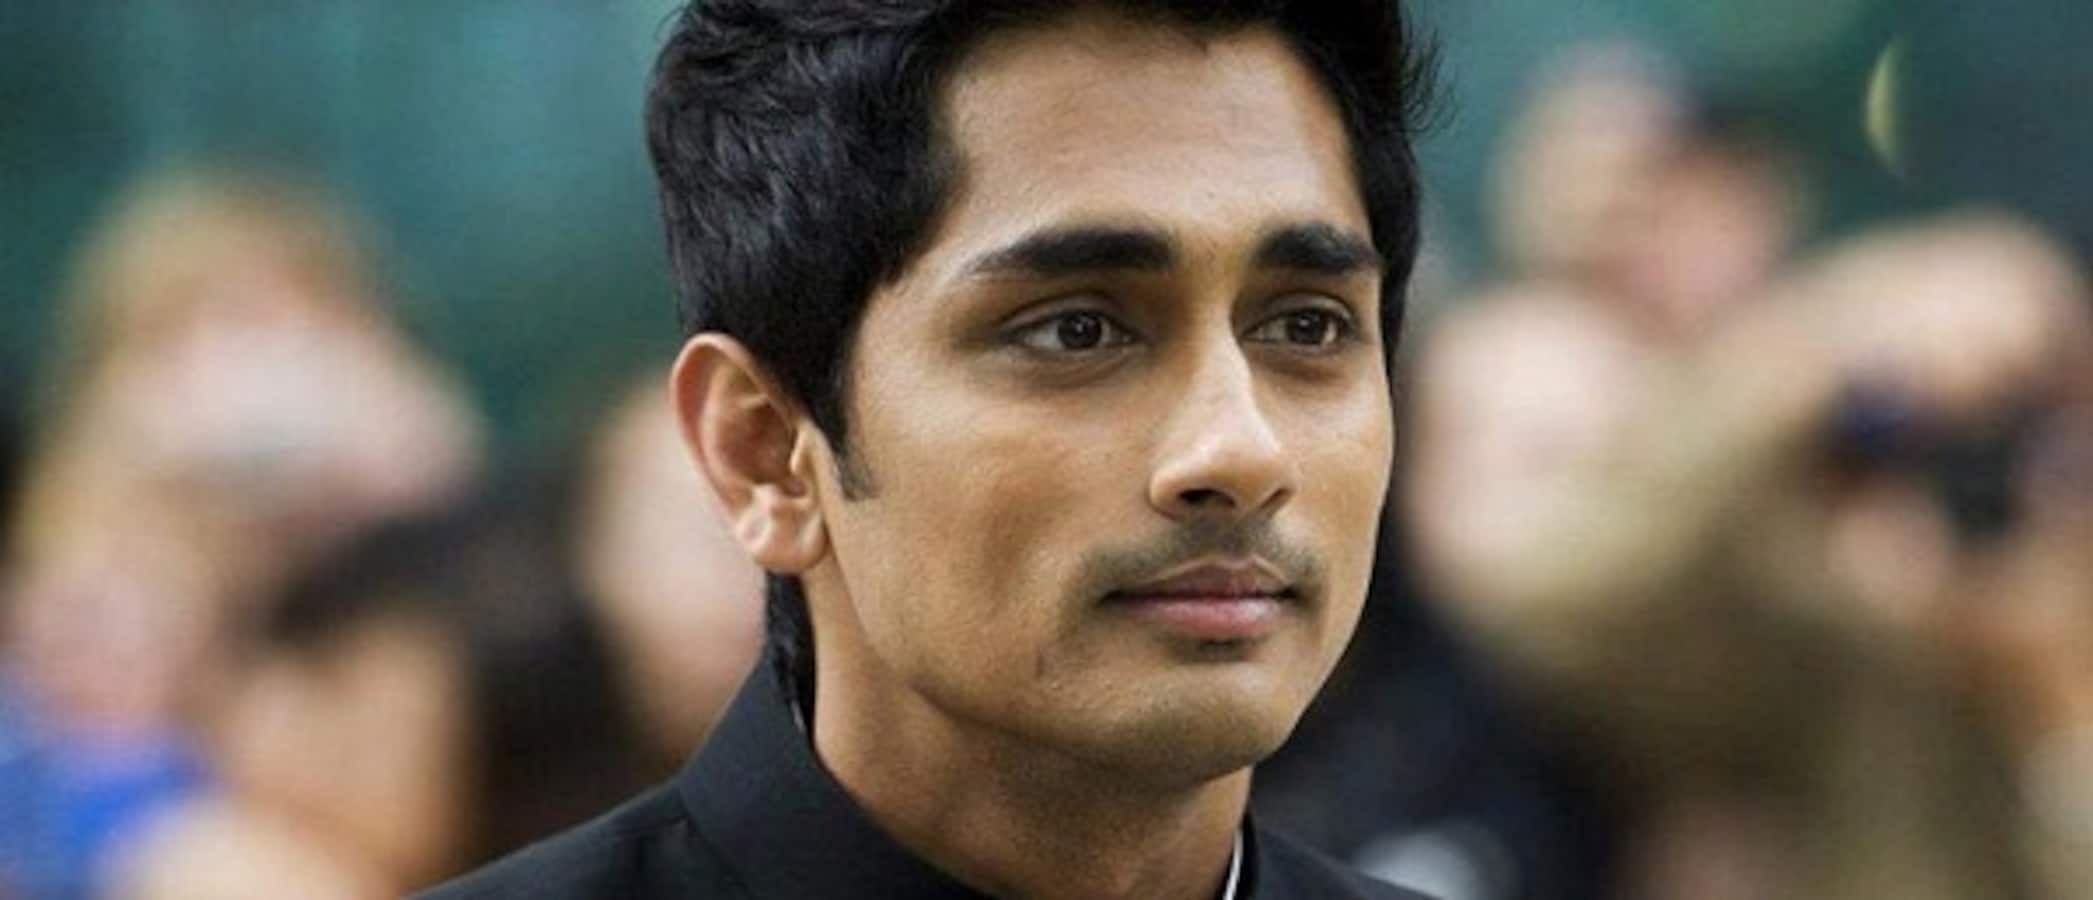 Rang De Basanti actor Siddharth speaks up against stalking in movies - check out tweets!